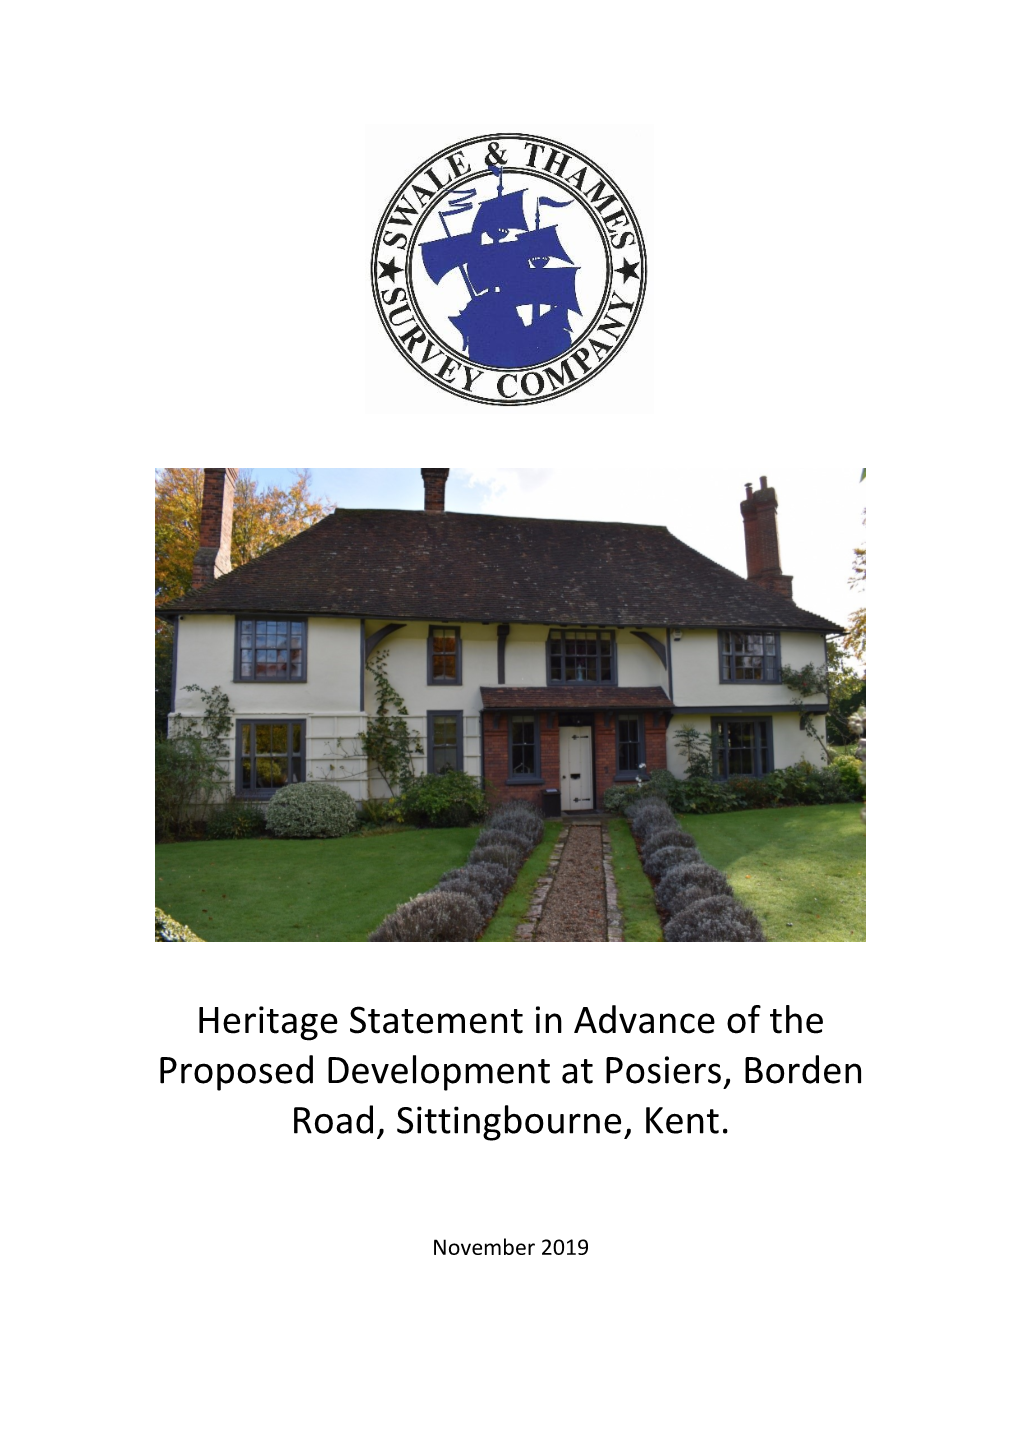 Heritage Statement in Advance of the Proposed Development at Posiers, Borden Road, Sittingbourne, Kent